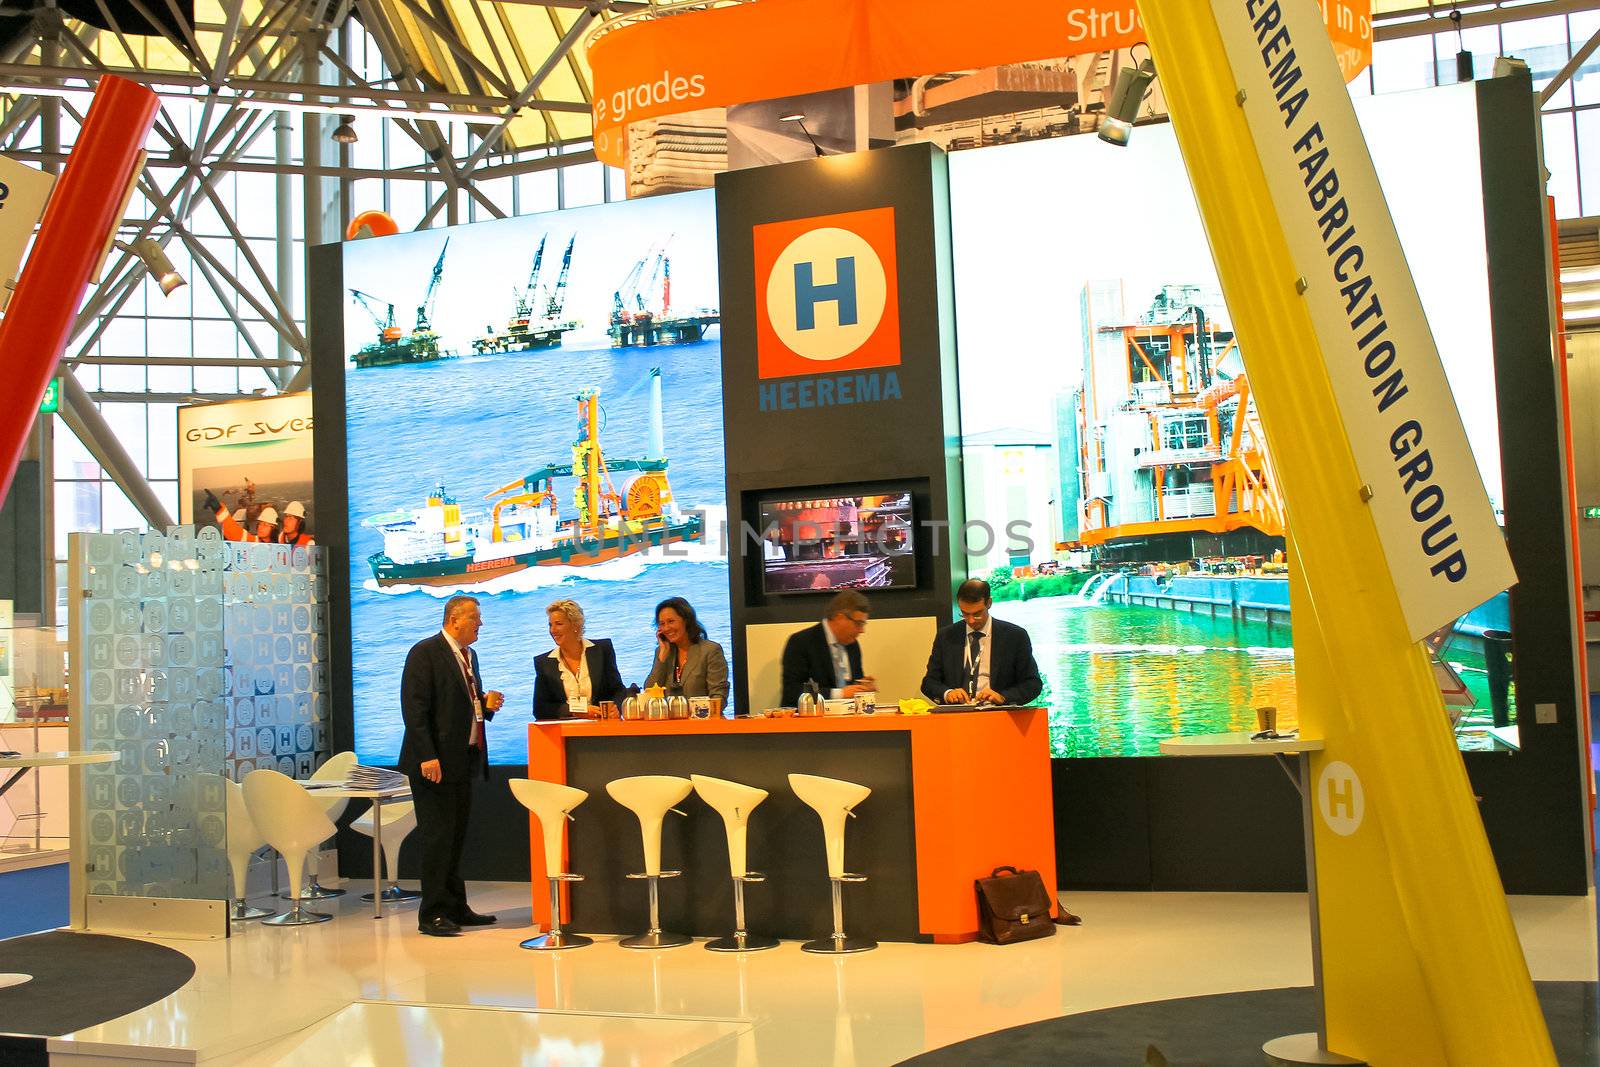 The exhibition Offshore Energy 2012. Amsterdam. Netherlands by NickNick